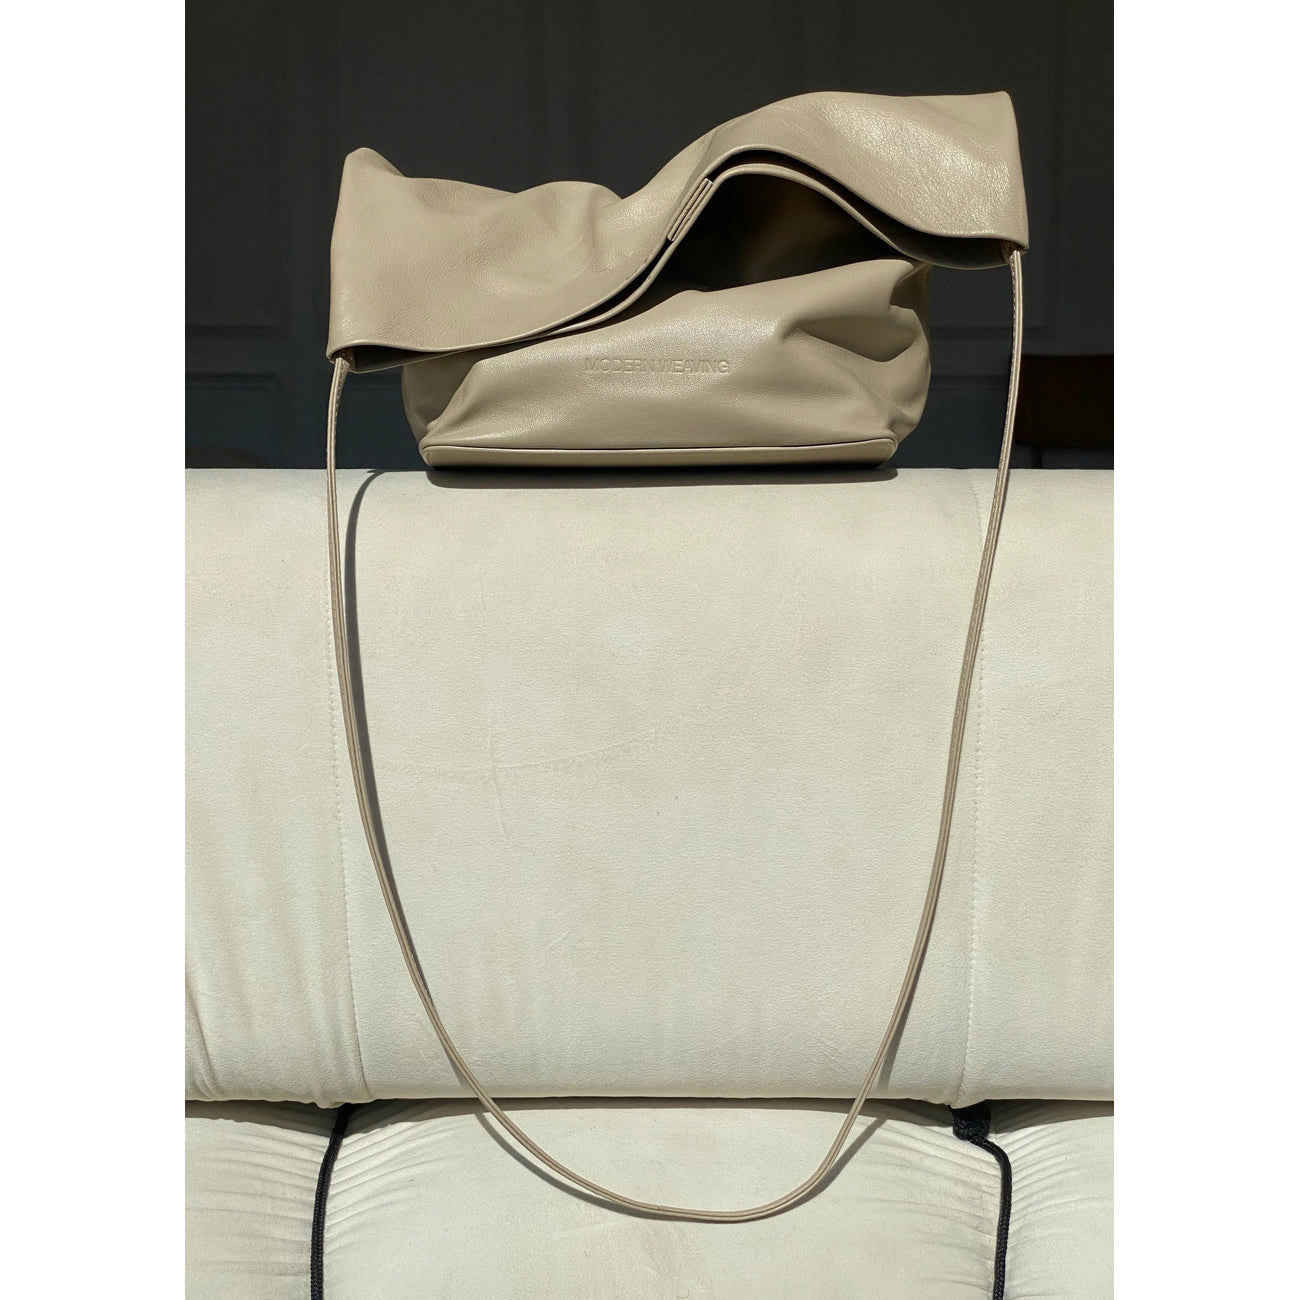 crossbody bag in taupe